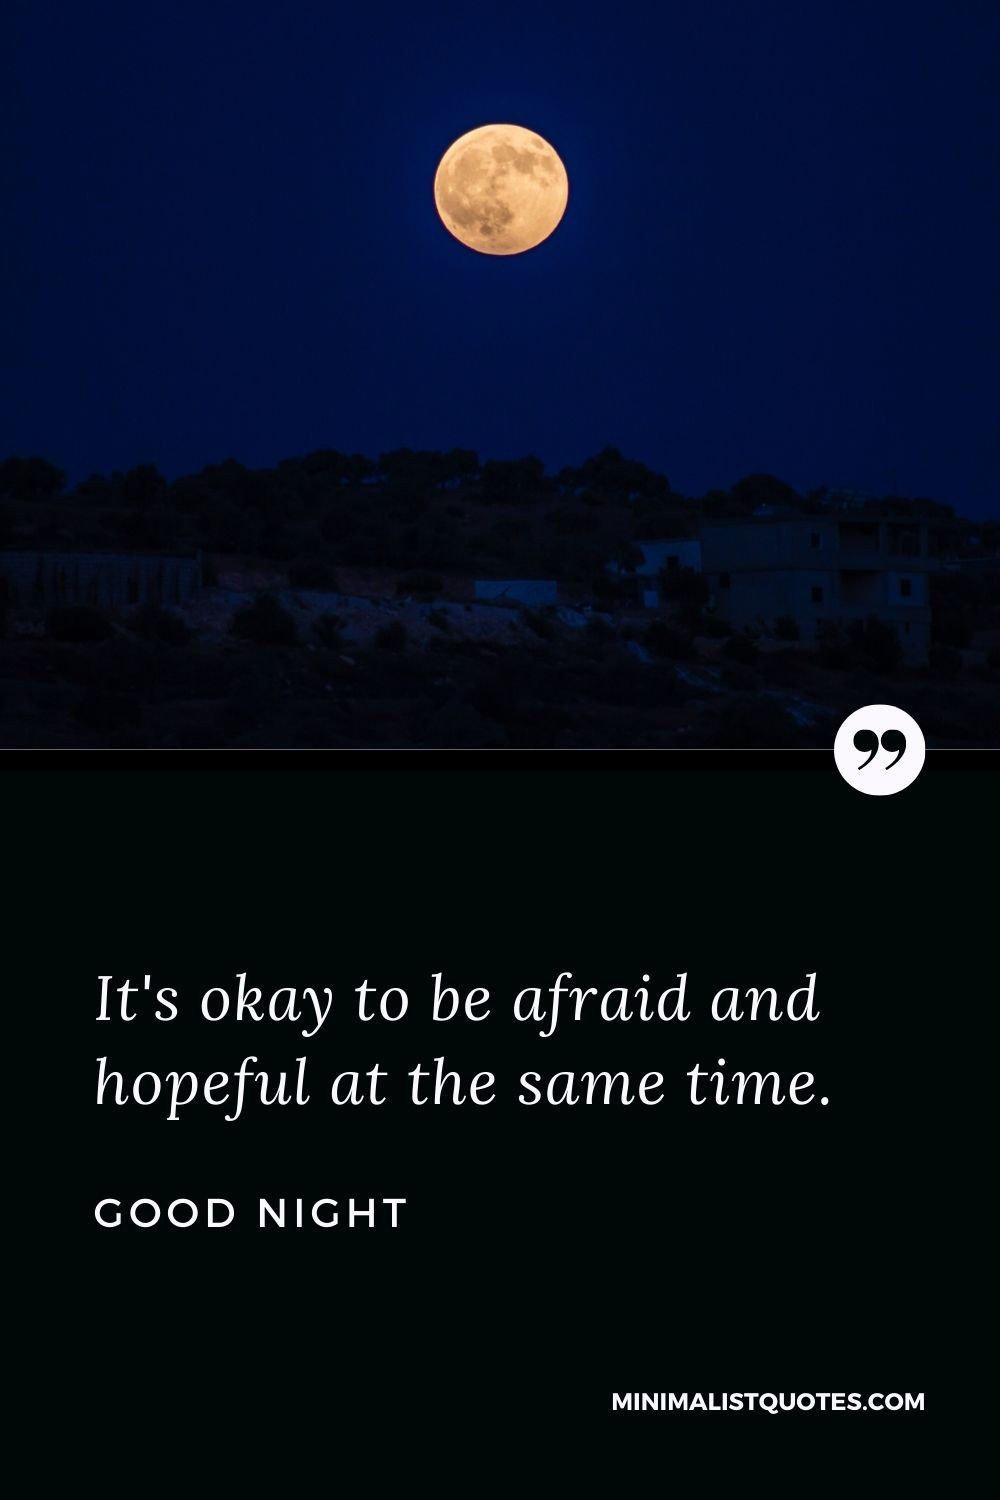 Good Night Wishes - It's okay to be afraid and hopeful at the same time.